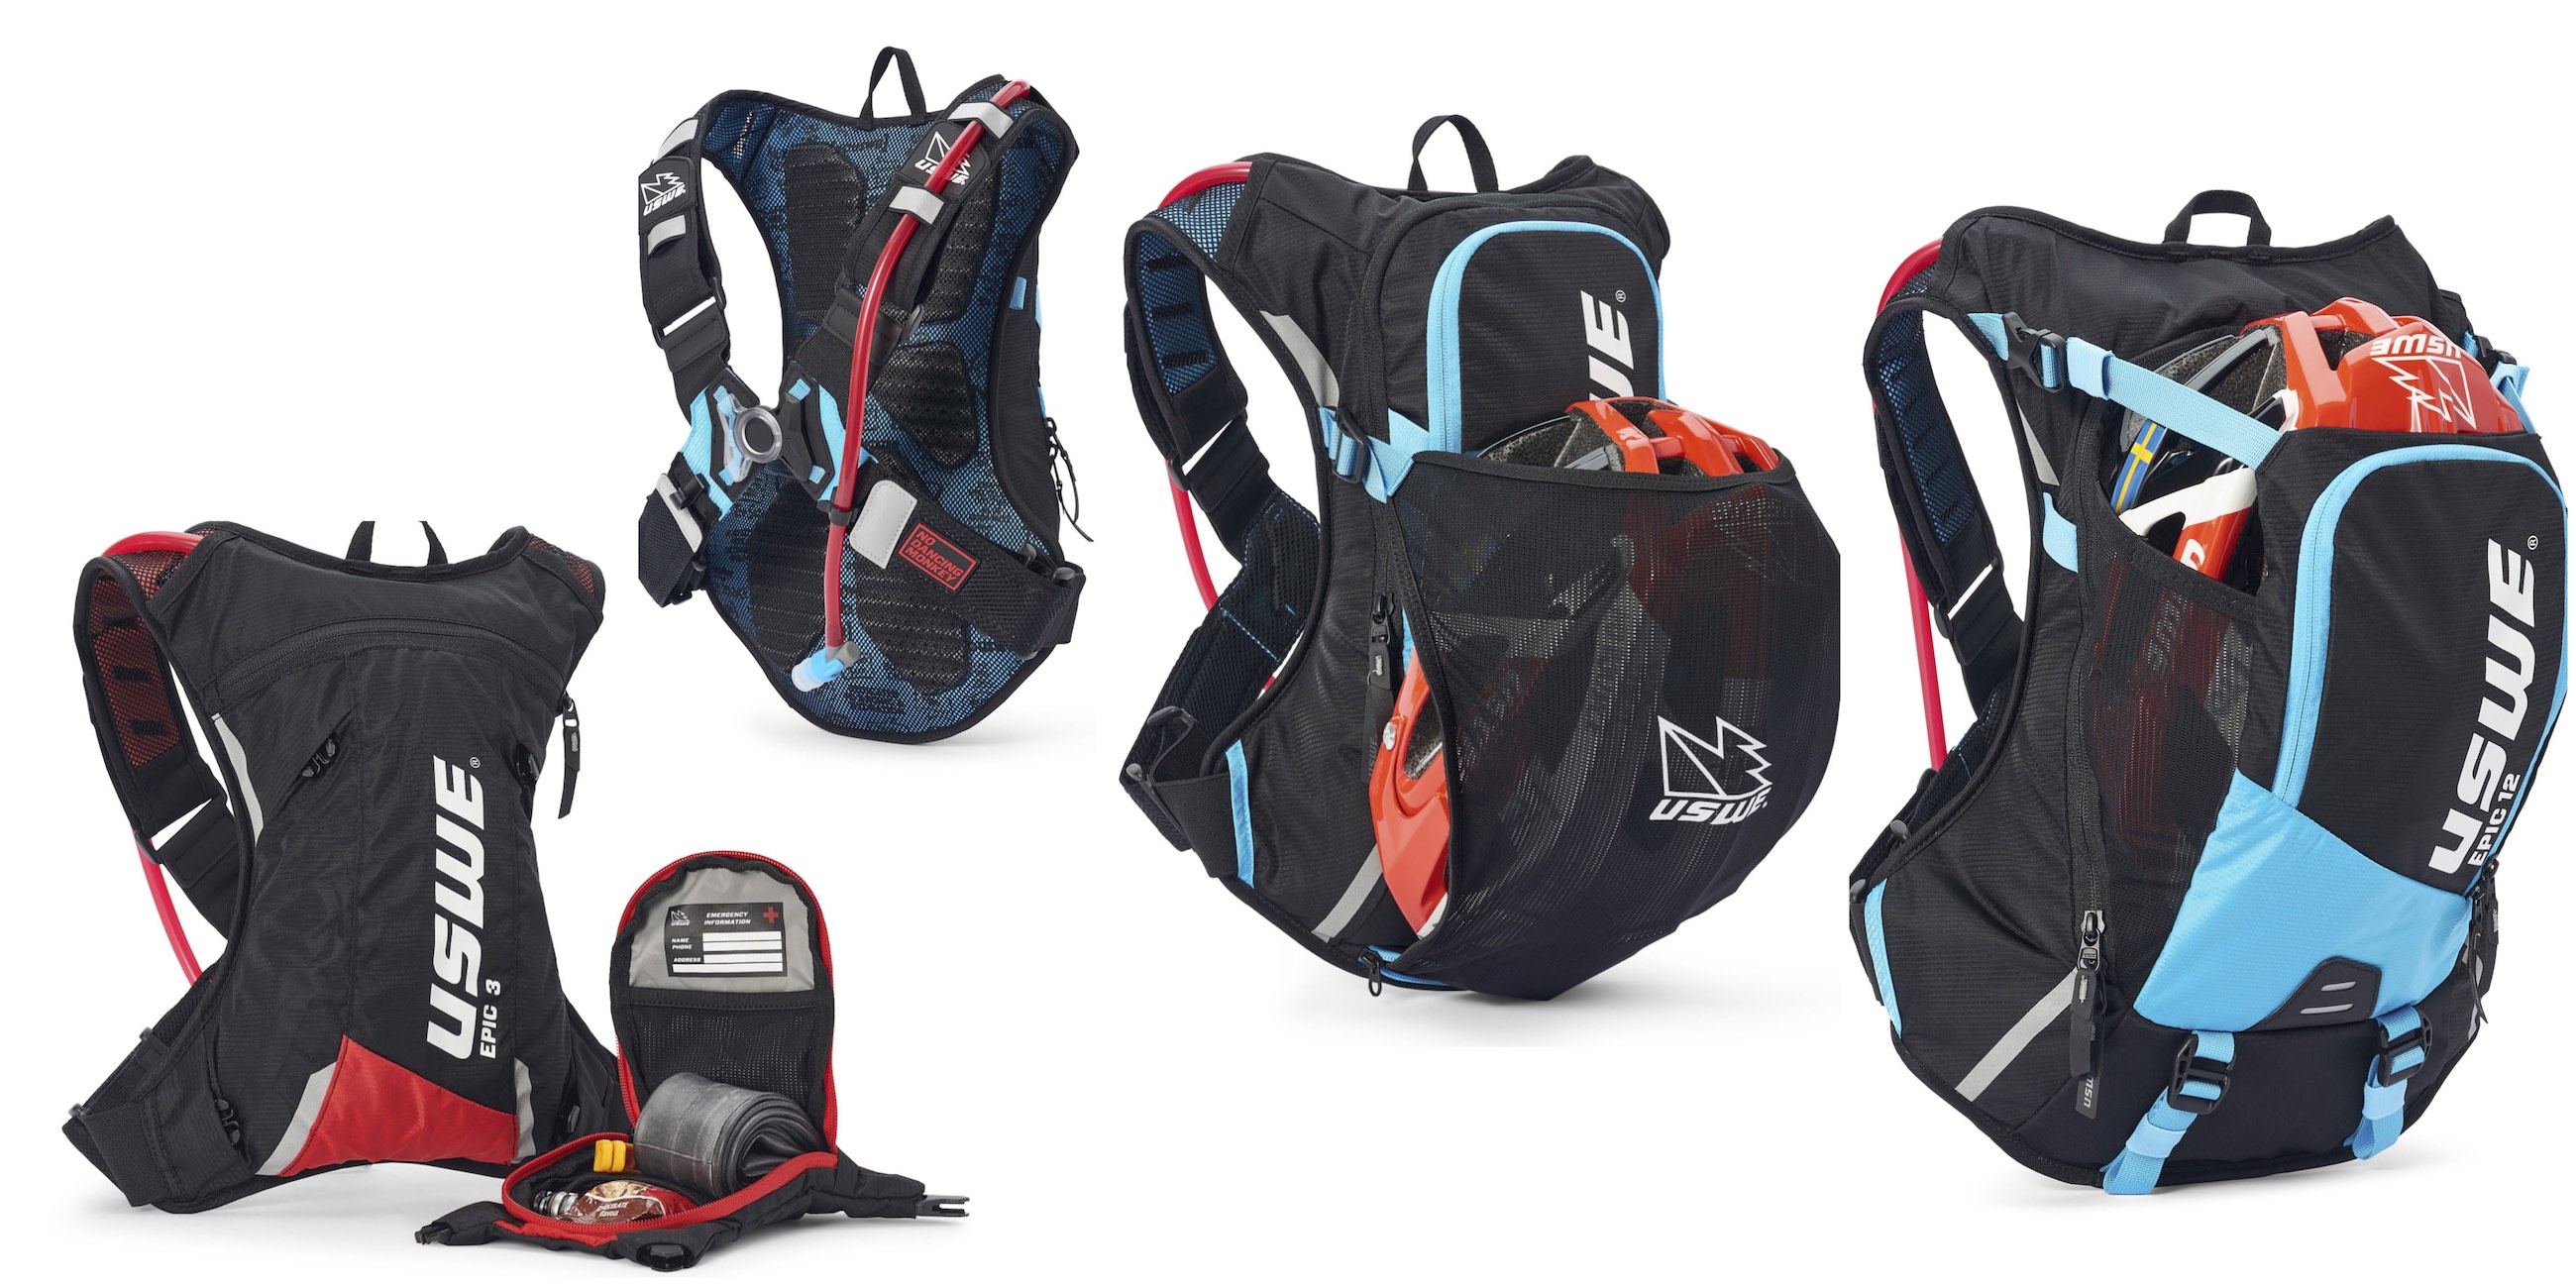 USWE Epic All Mountain Hydration Packs – 3L, 8L, 12L |